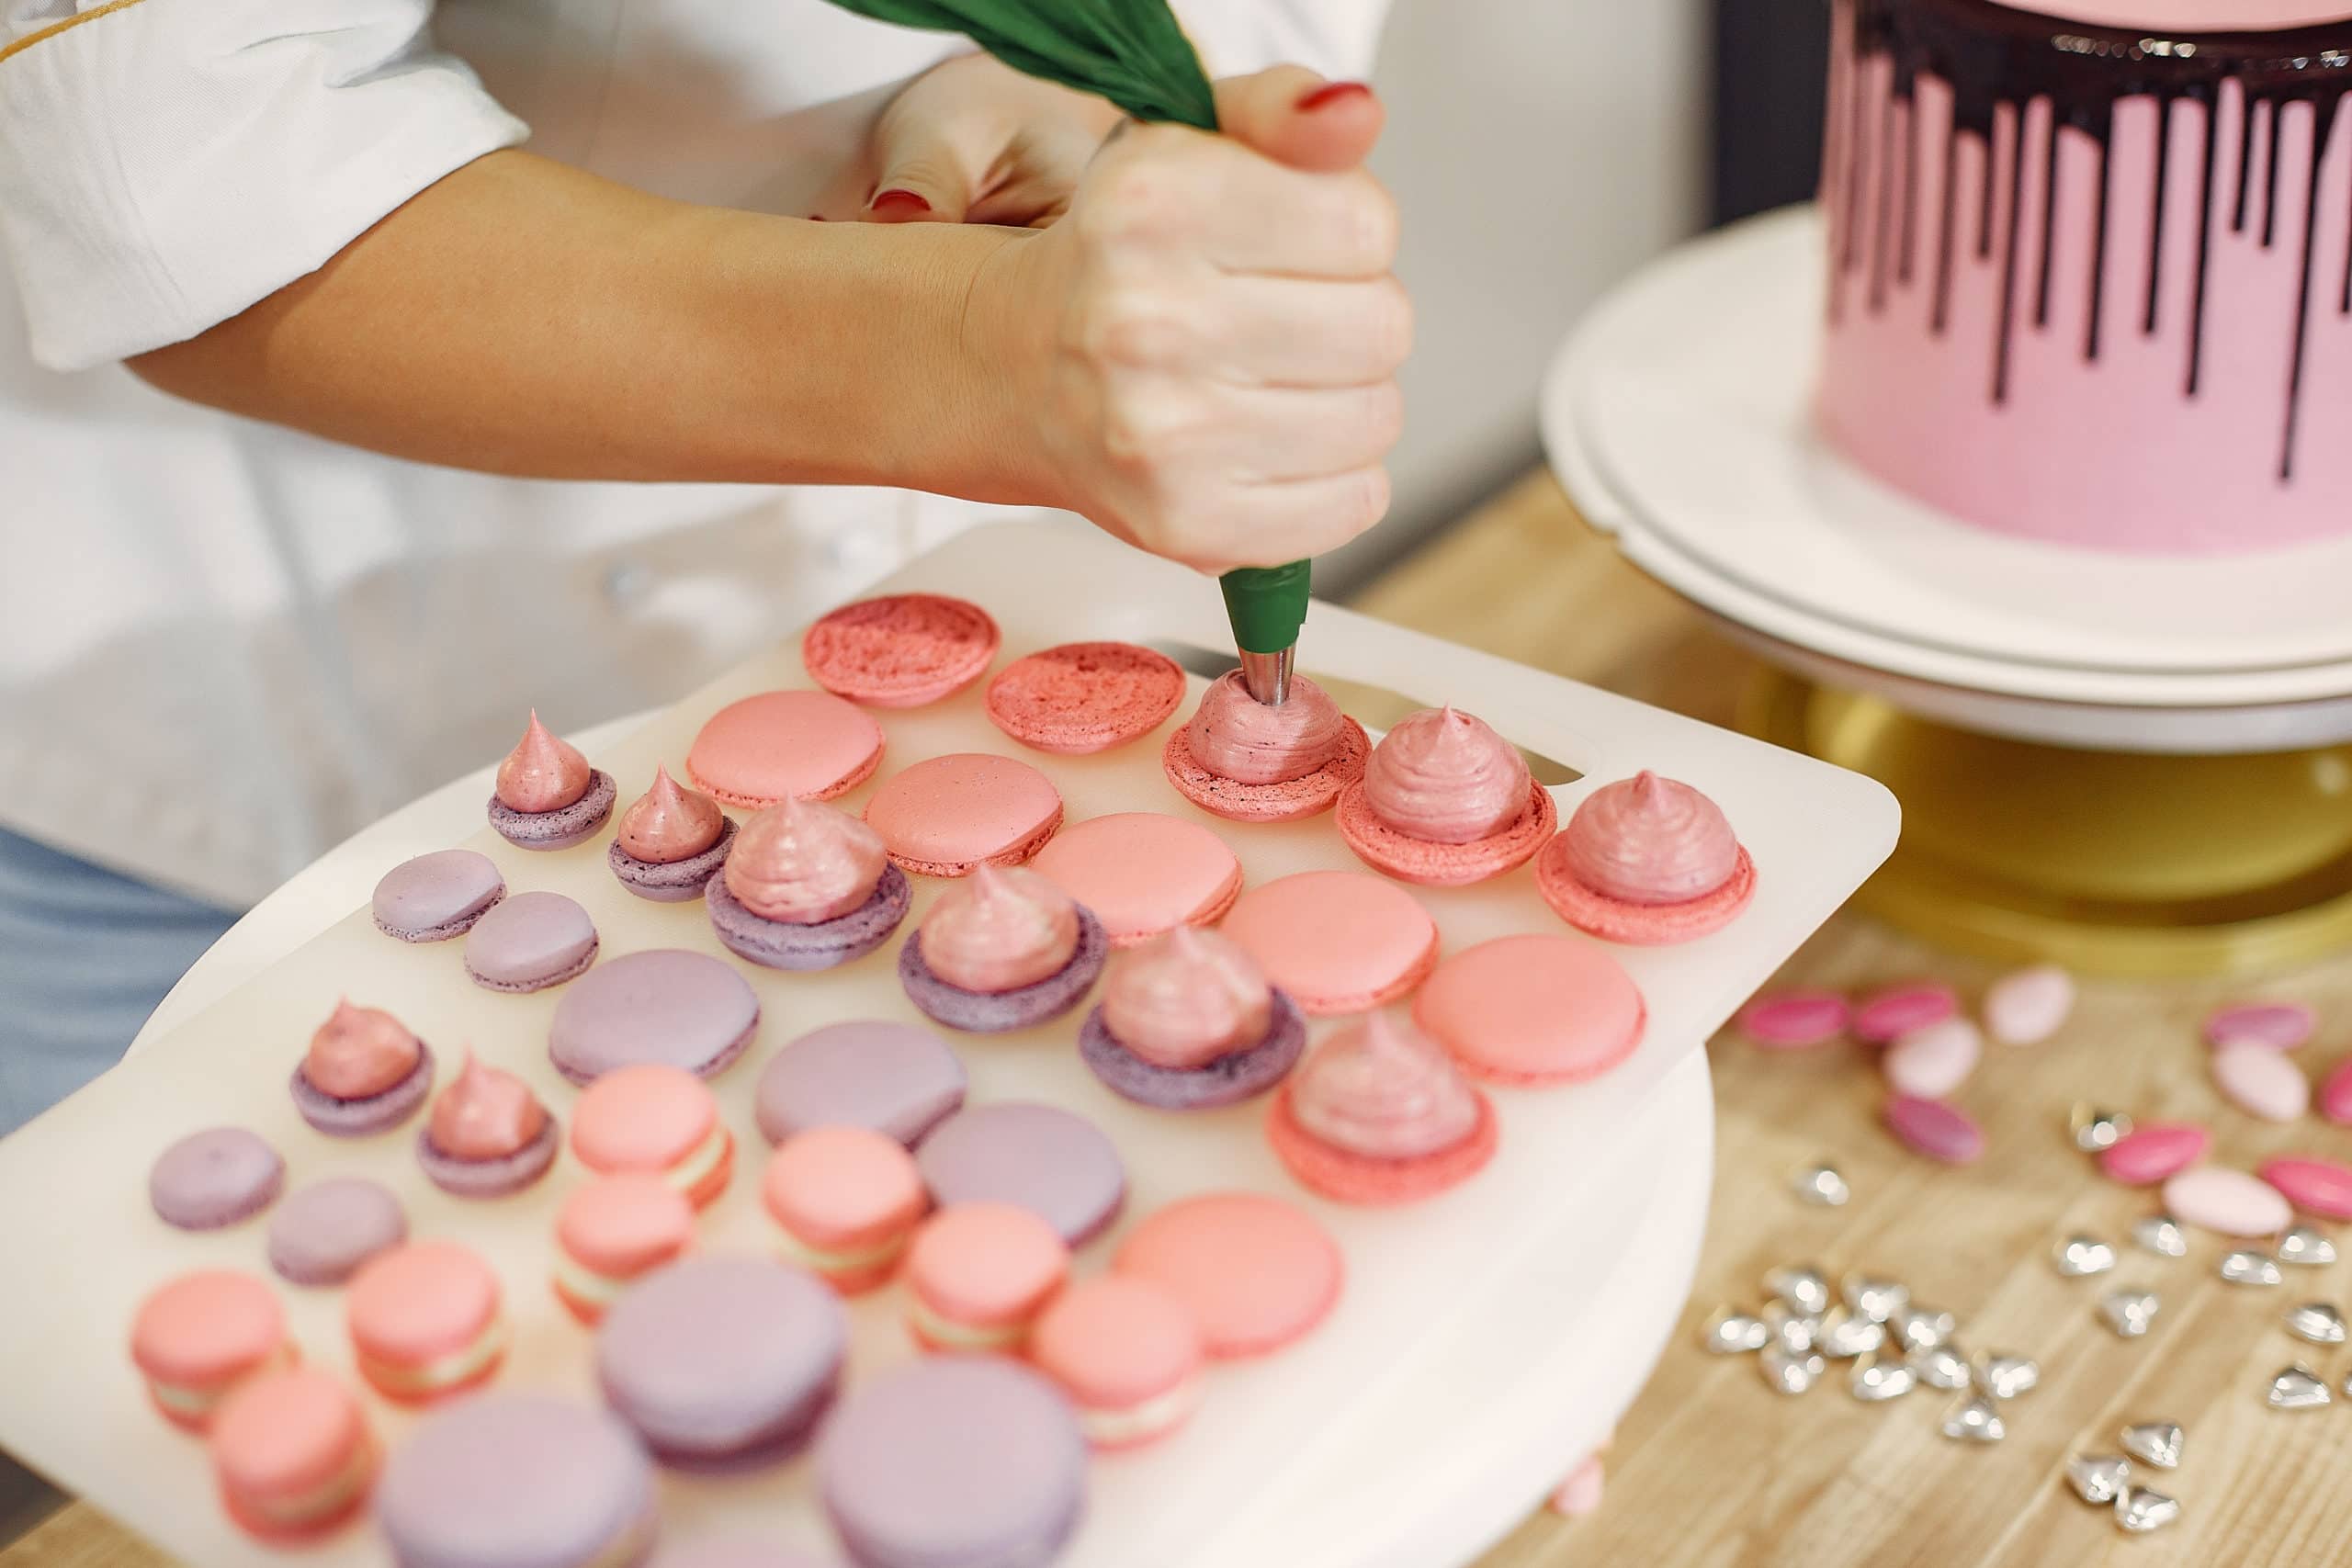 Cake Piping: A Beginner's Guide to Decorating Cakes